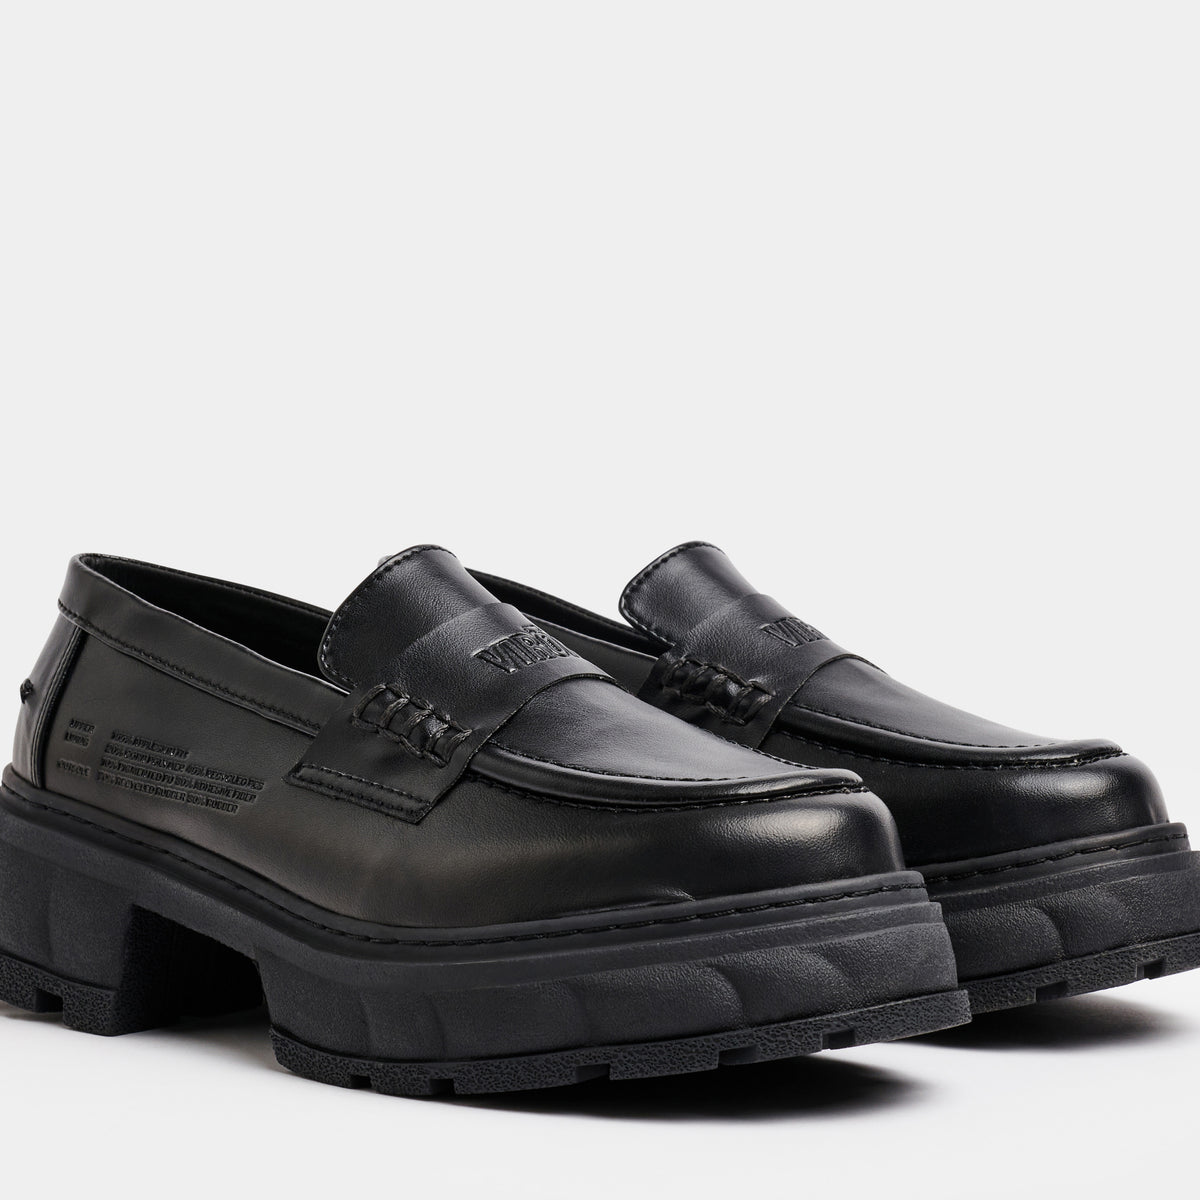 Quantum Vegan raised Loafer shoes out of Appleskin in Black Apple shown from the front